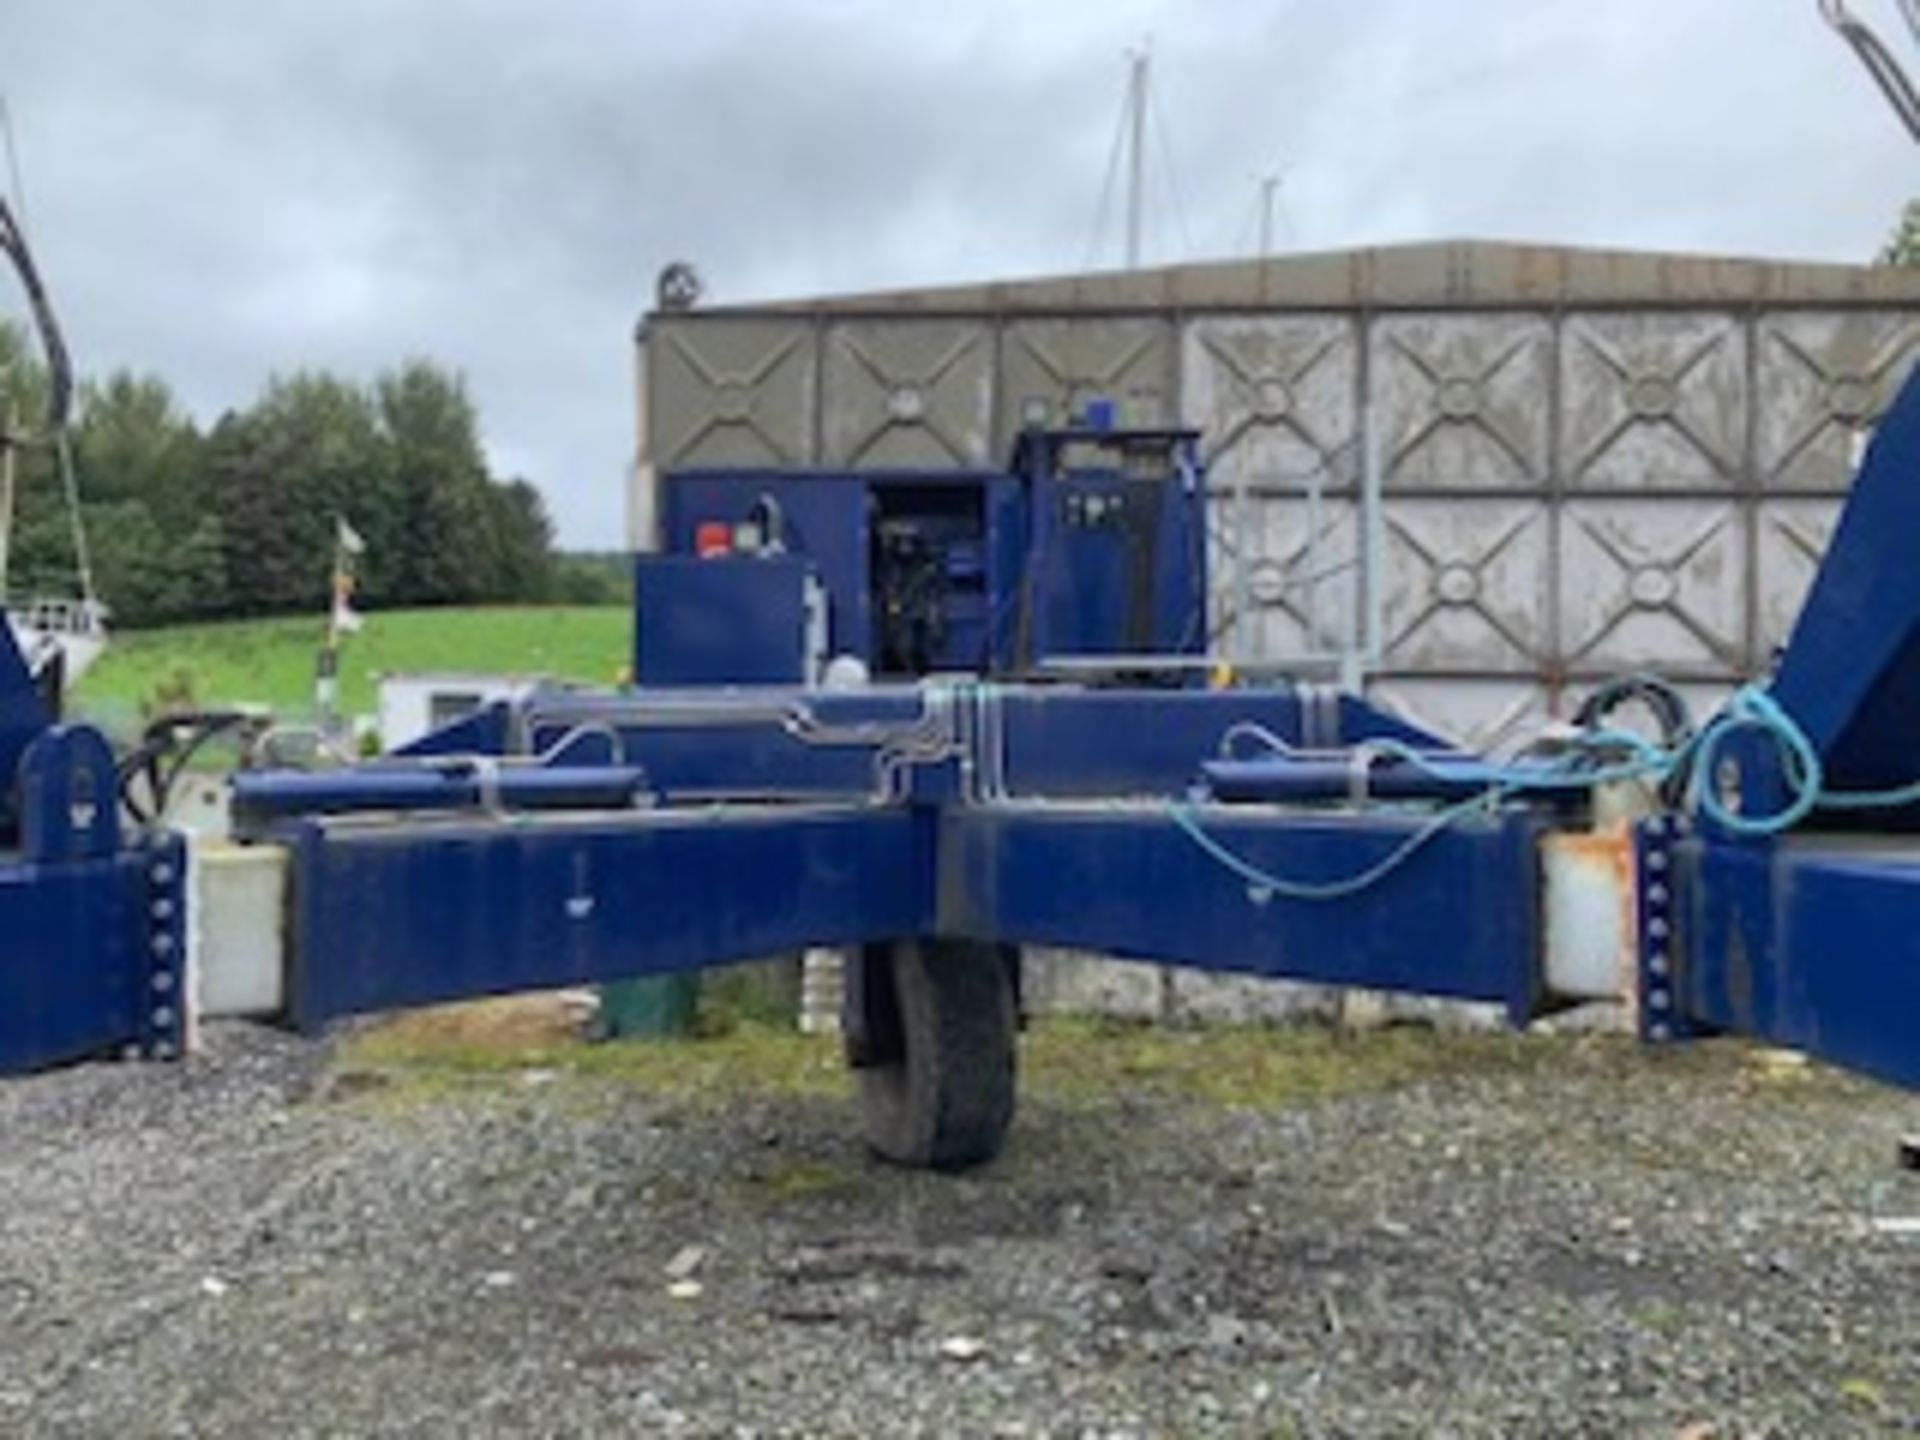 18T SELF PROPELLED WISE AMPHIBIOUS MARINE HOIST C/W VARIABLE WIDTH FRAME **RECENTLY REFURBED - NEW P - Image 15 of 19